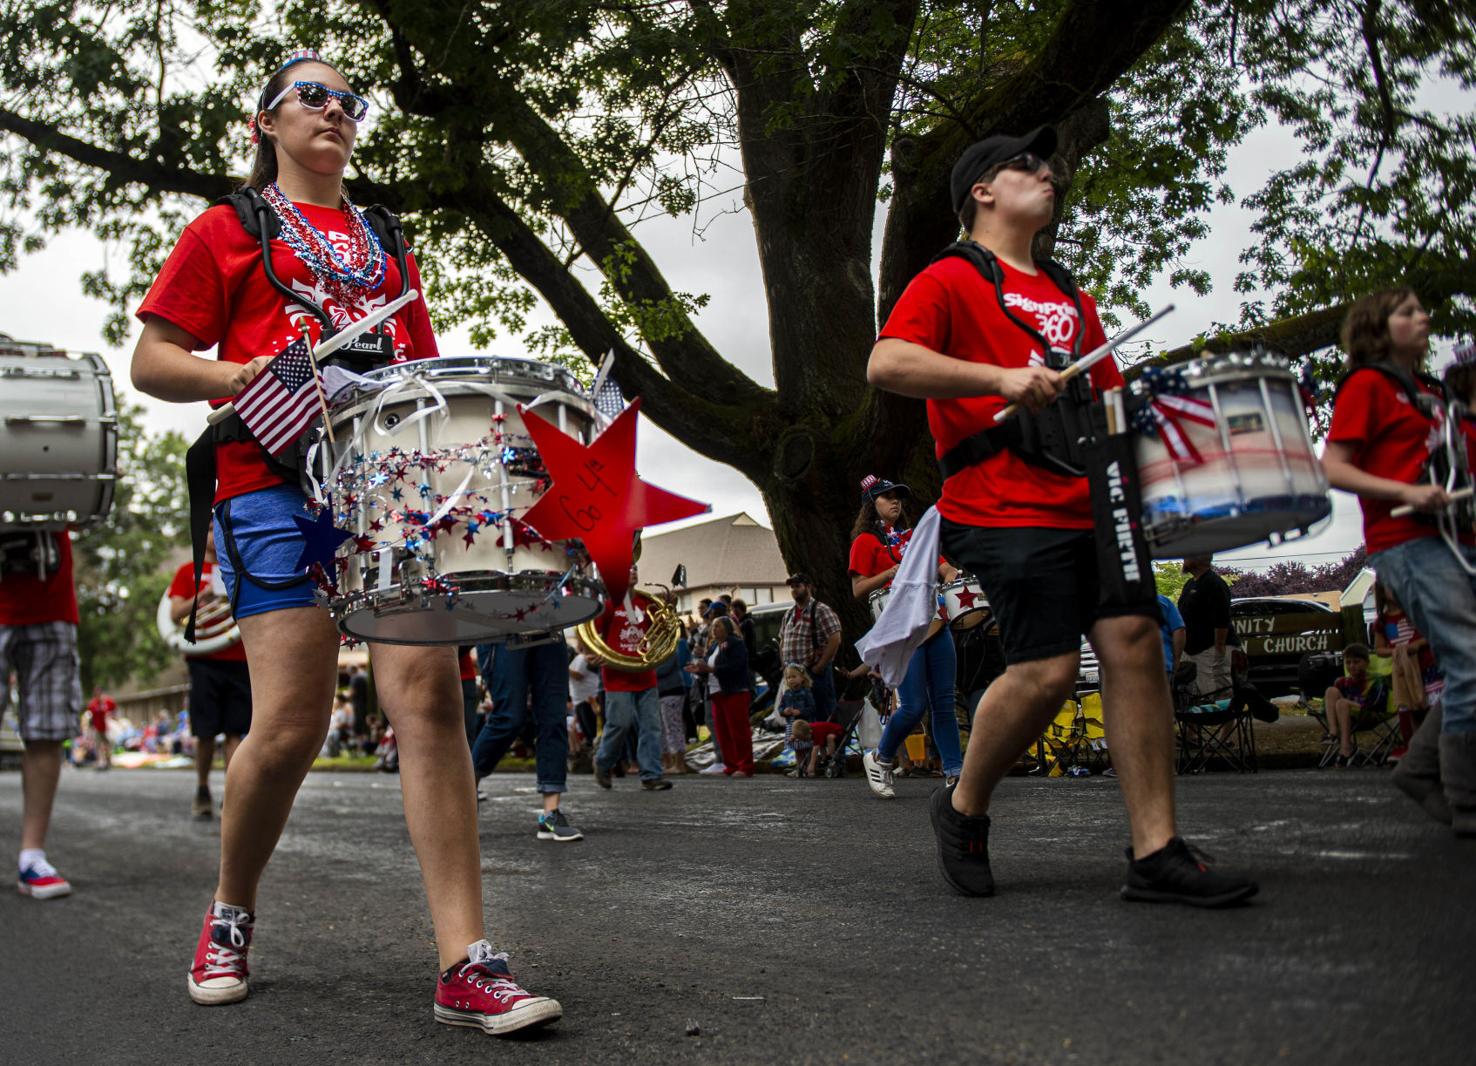 Organizers move forward planning this year's Go 4th Festival in Longview